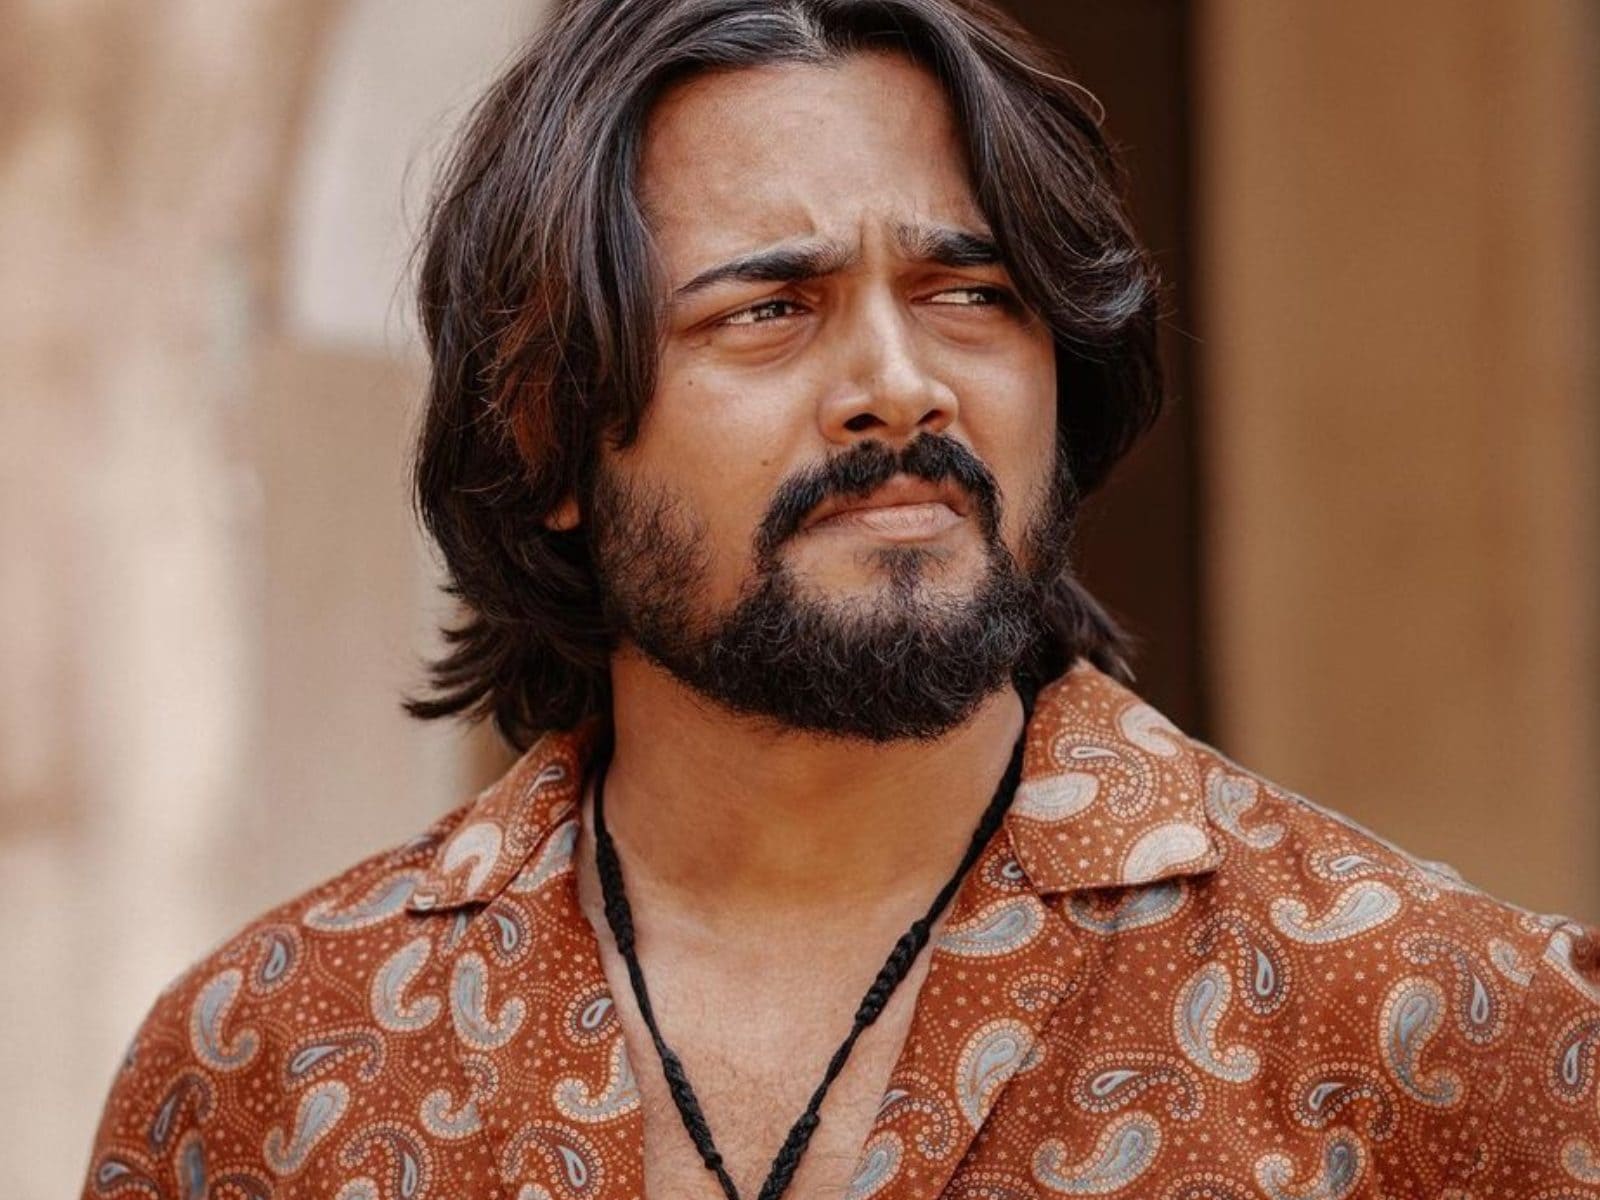 Bhuvan Bam With Long Or Short Hairstyle: Which is Better? | IWMBuzz